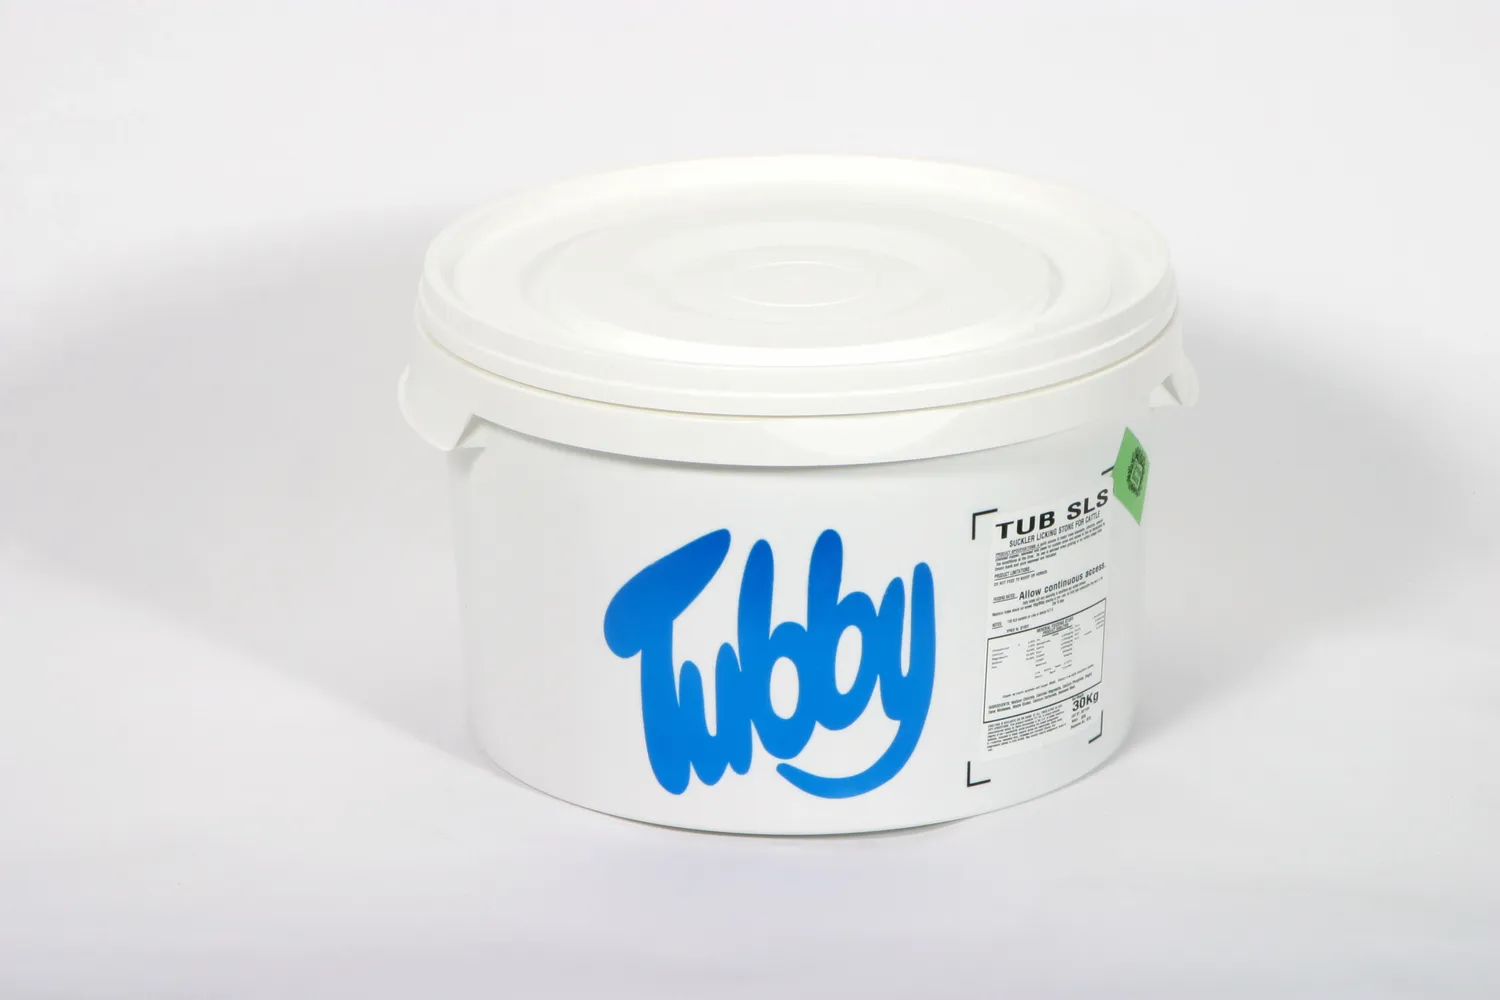 Tubby - Forbut Sheep Bucket (Orf Treatment)